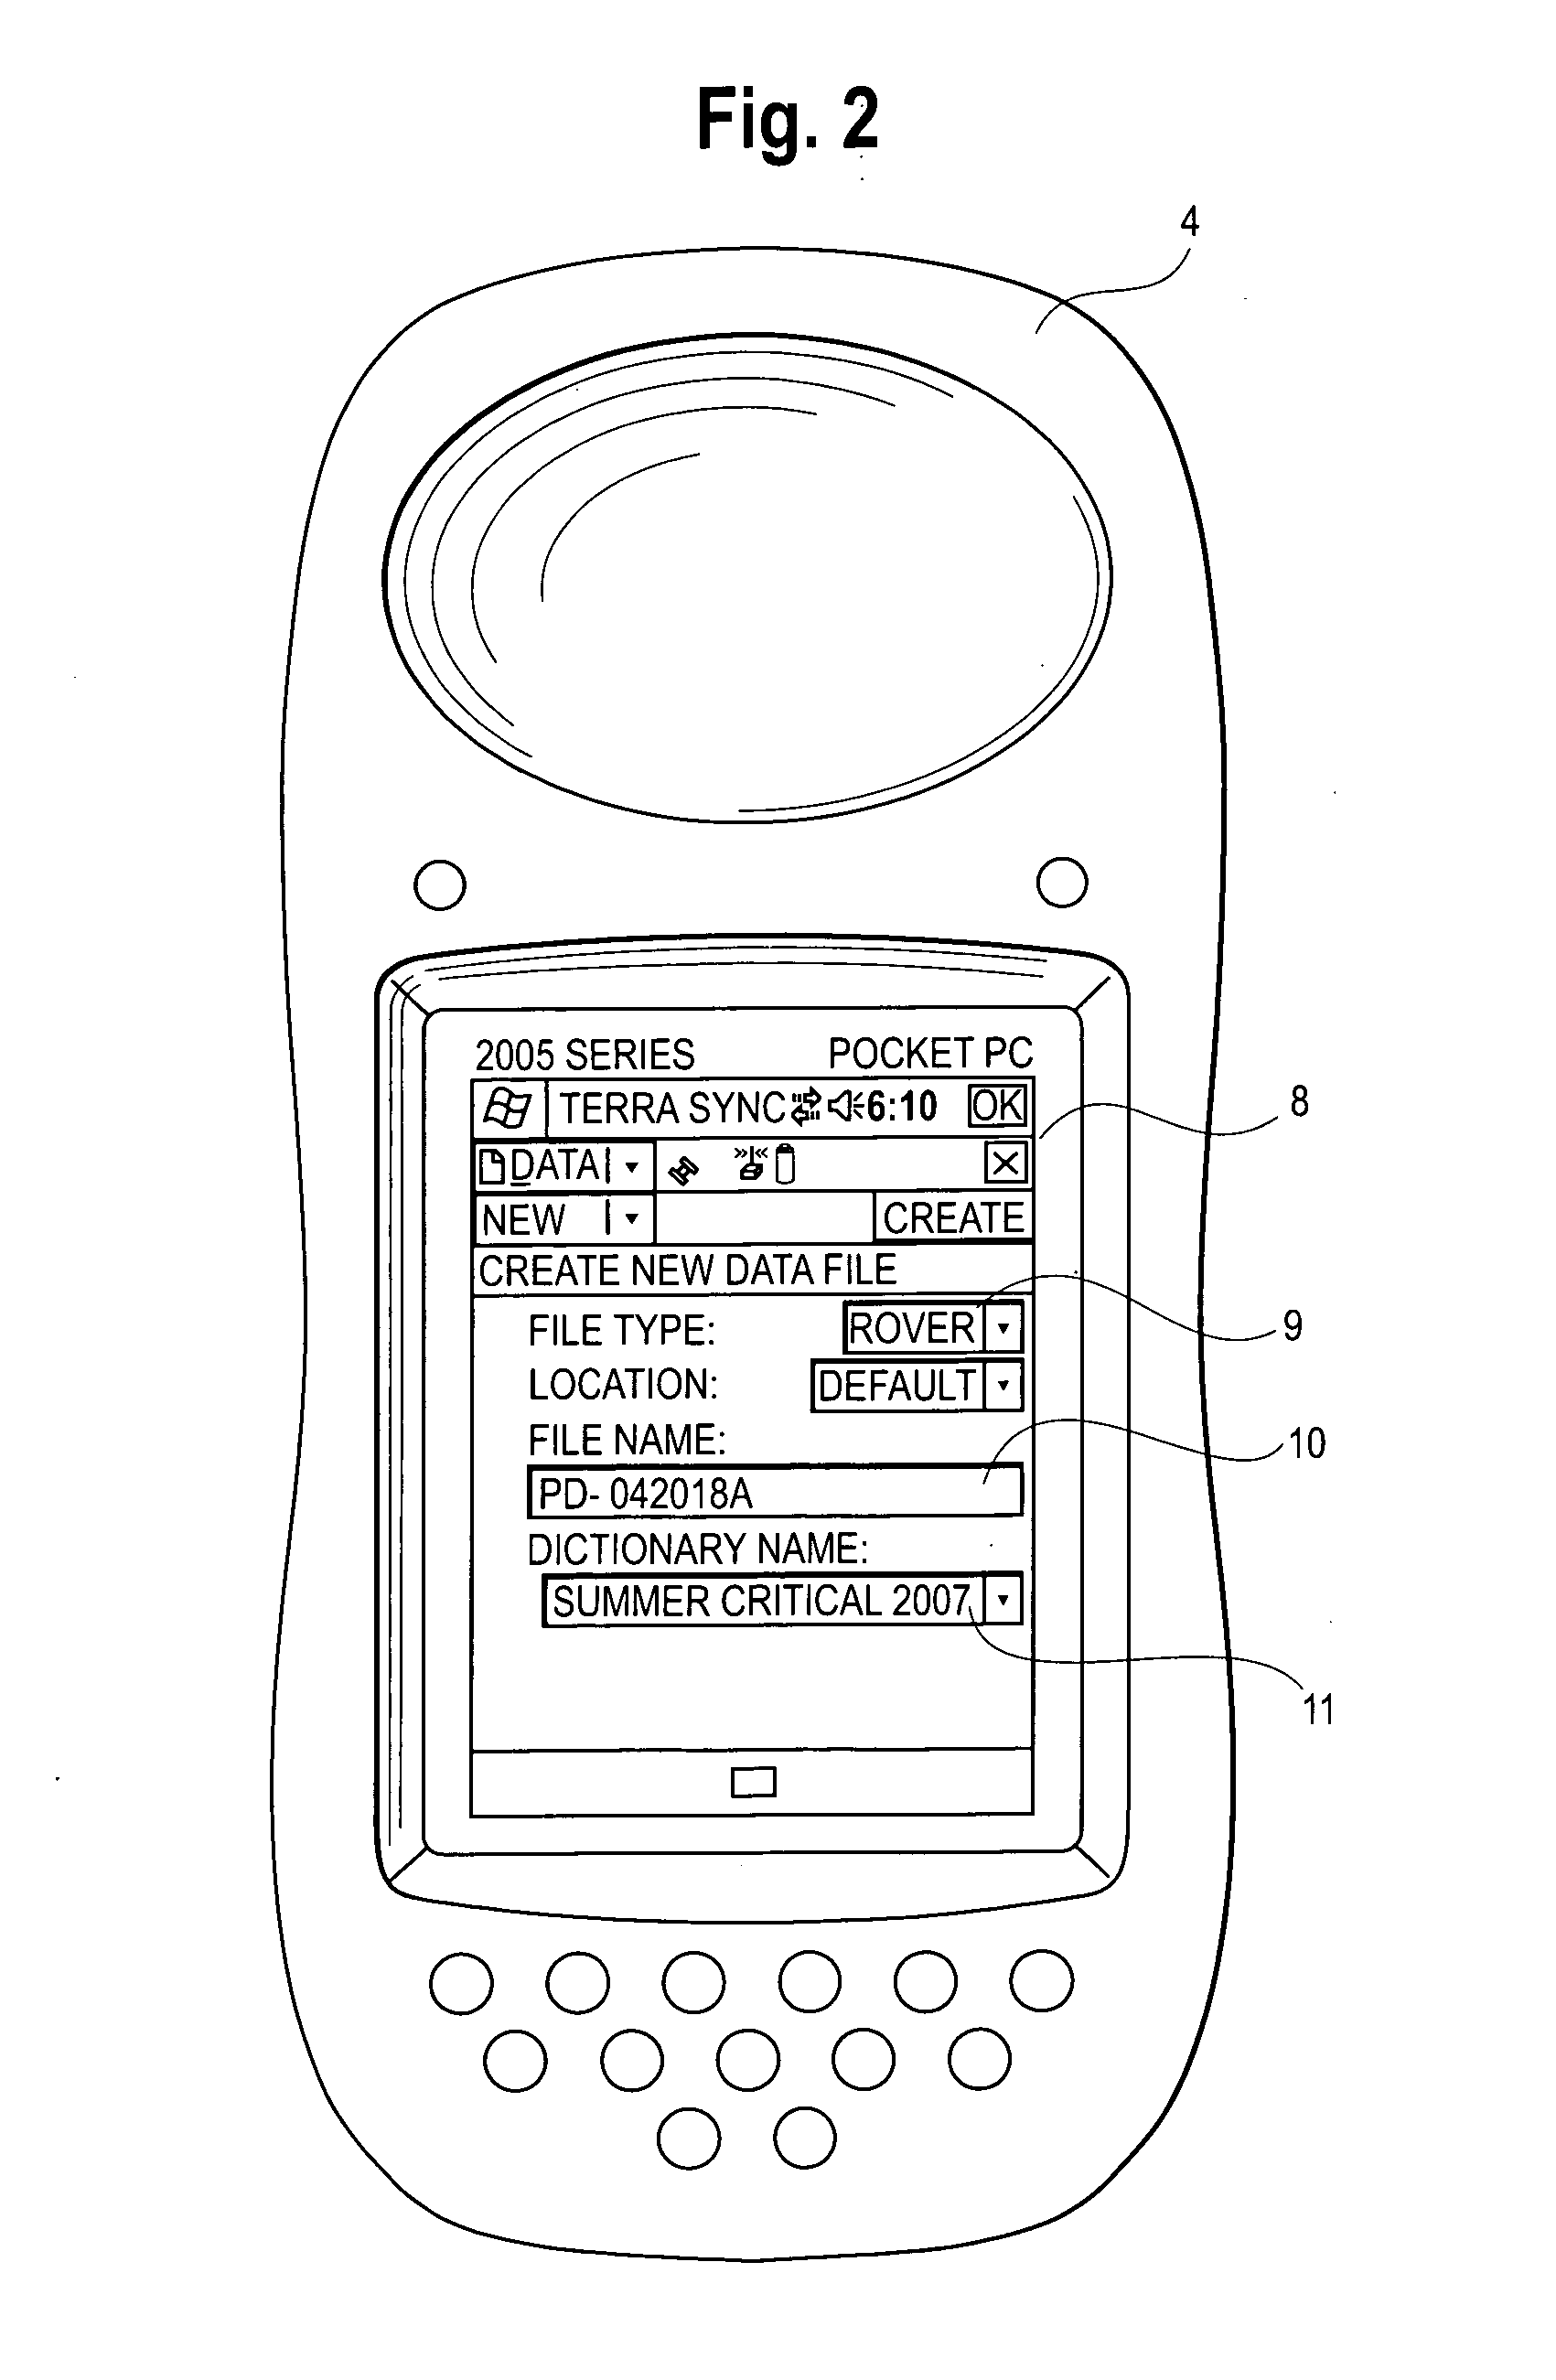 Field site data gathering and reporting system and method